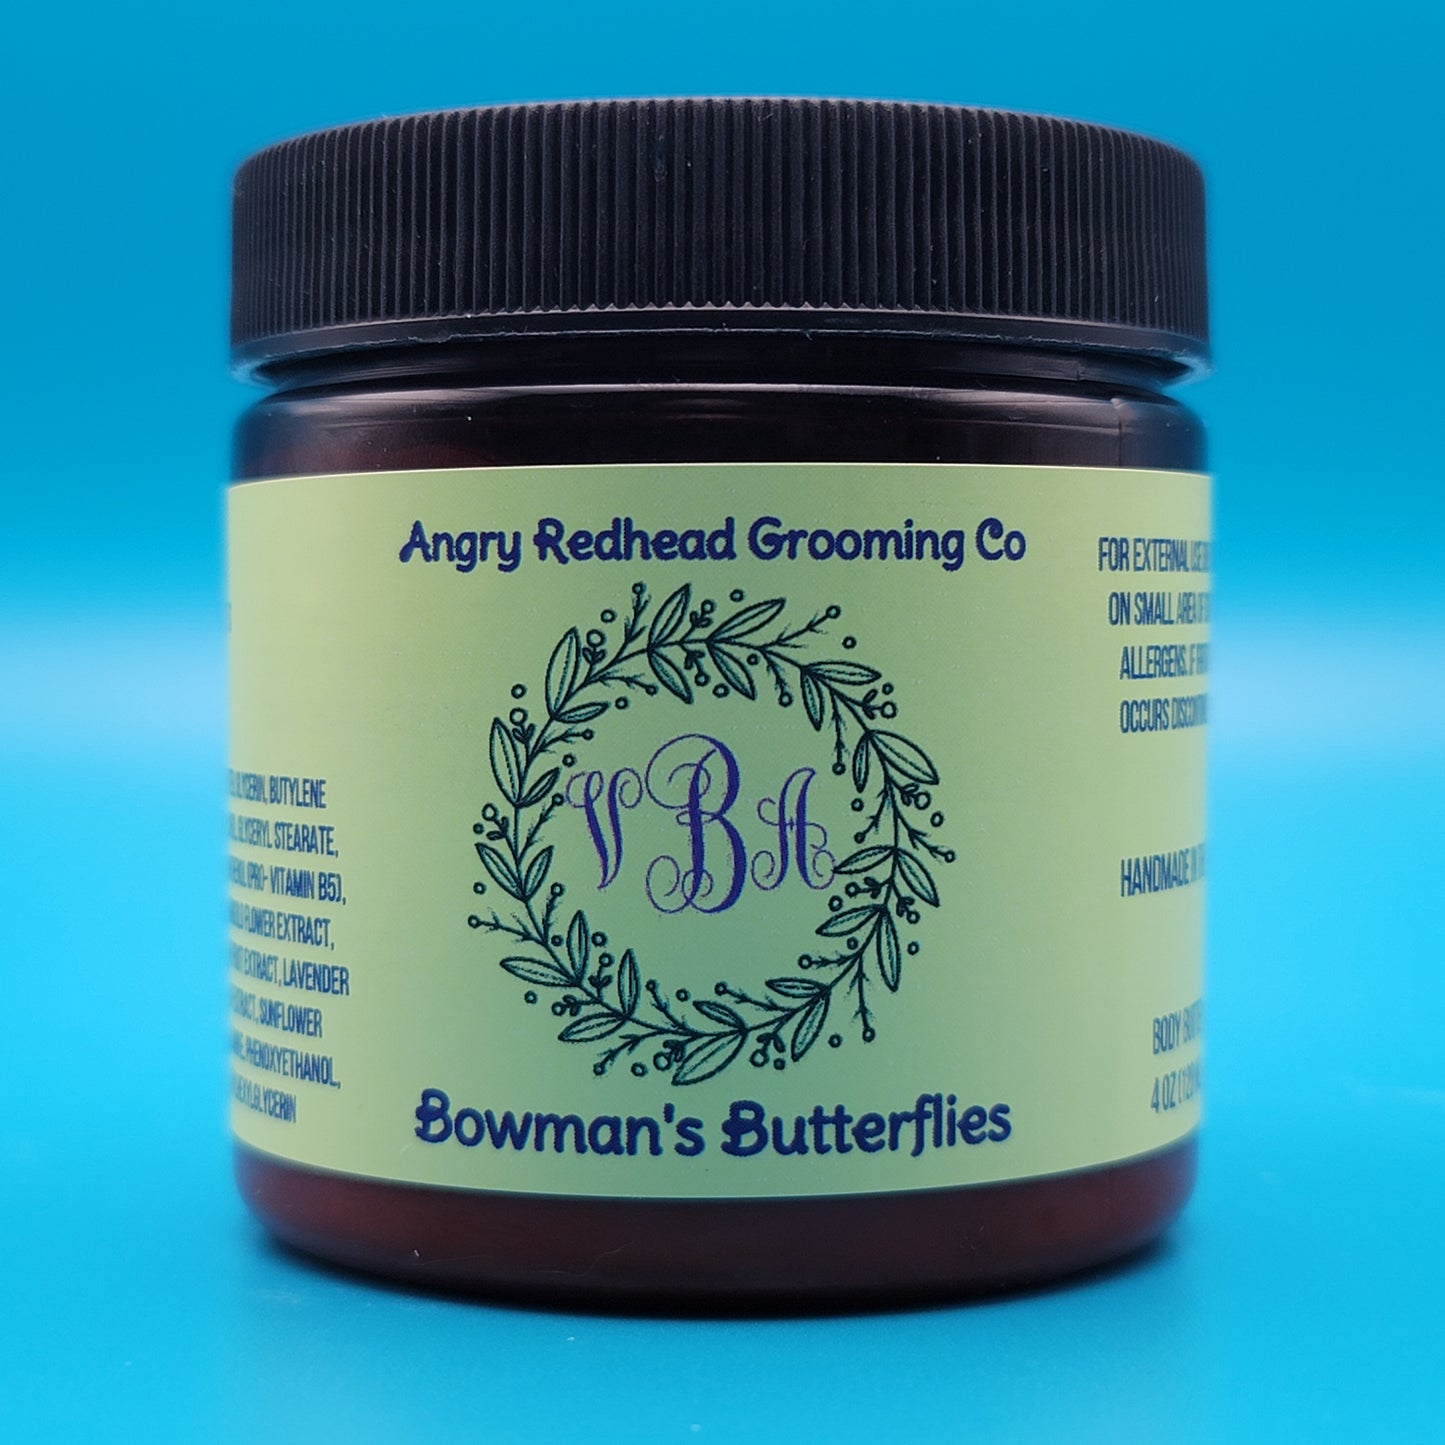 Bowman's Butterflies Body Butter by Angry Redhead Grooming Co - angryredheadgrooming.com